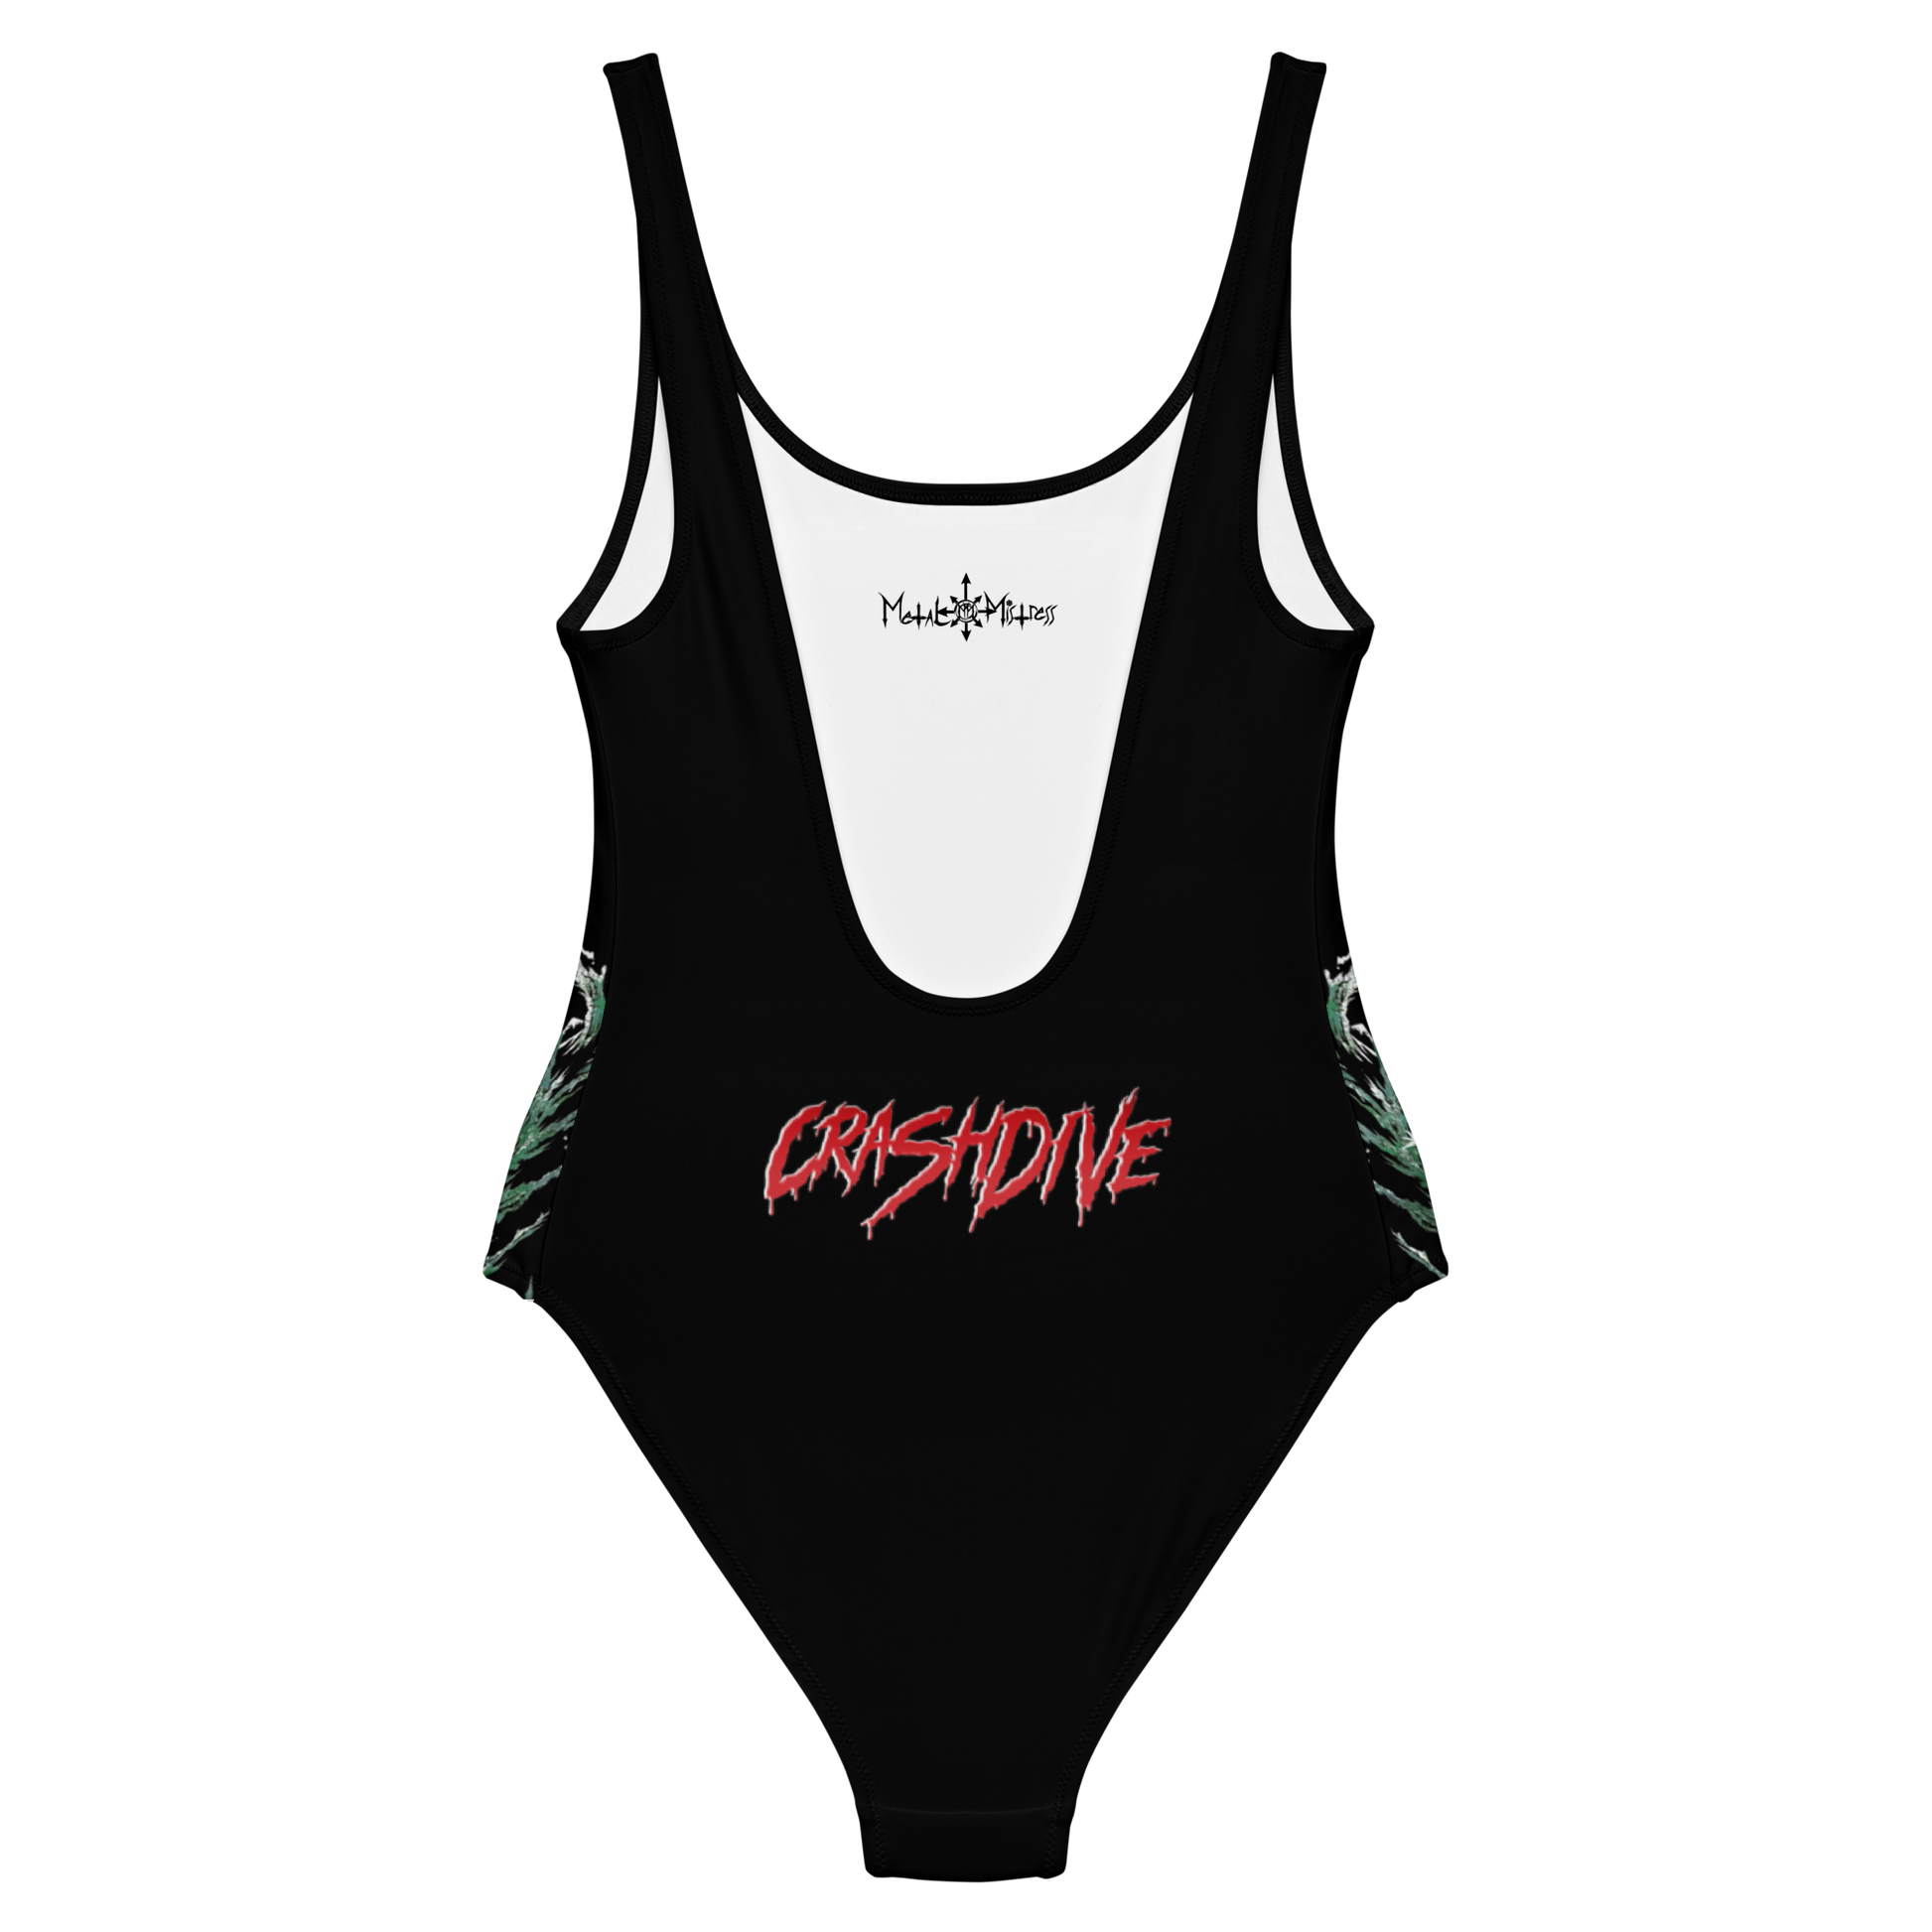 Tailgunner Crashdive official licensed one piece swimsuit by Metal Mistress